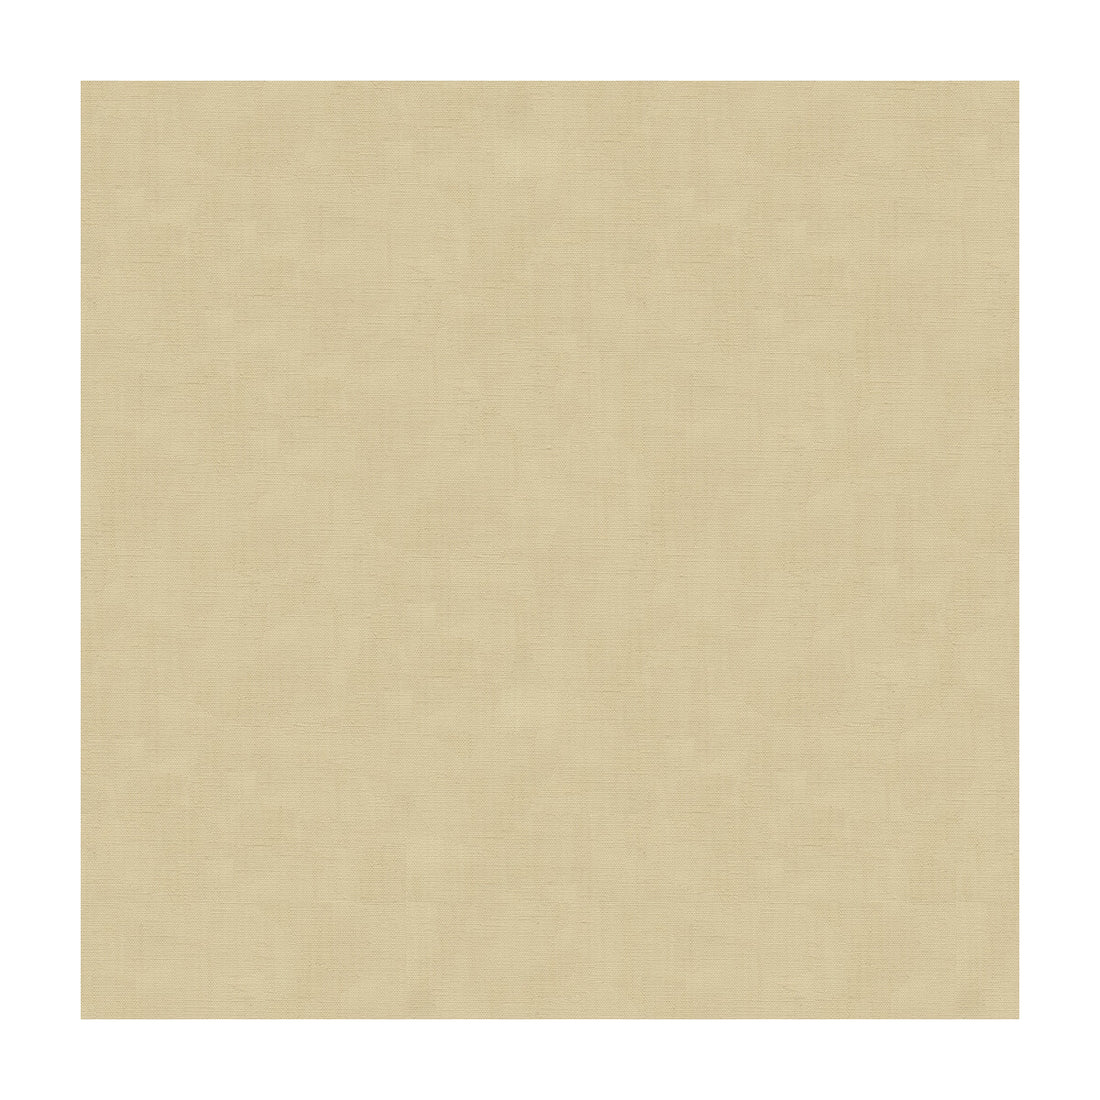 Kravet Contract fabric in 3915-16 color - pattern 3915.16.0 - by Kravet Contract